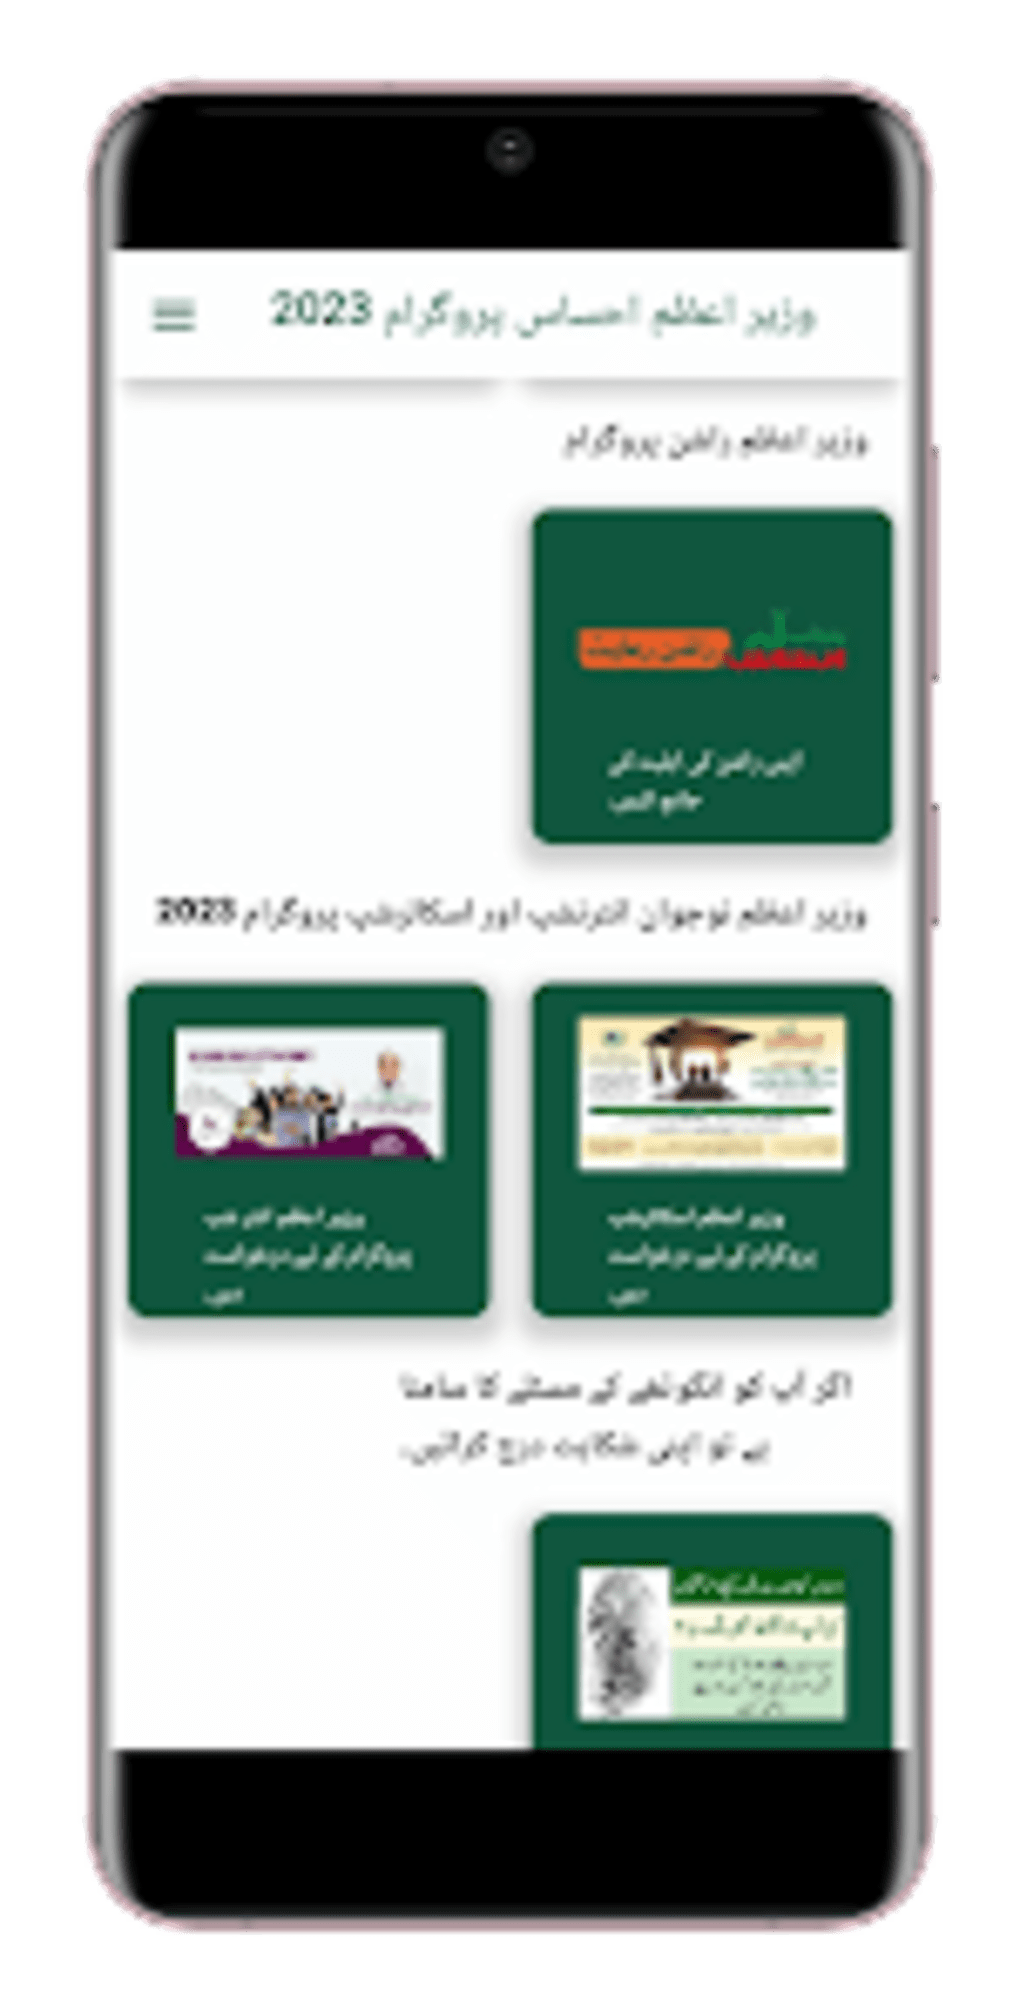 pm-ehsaas-program-relief-2023-pour-android-t-l-charger